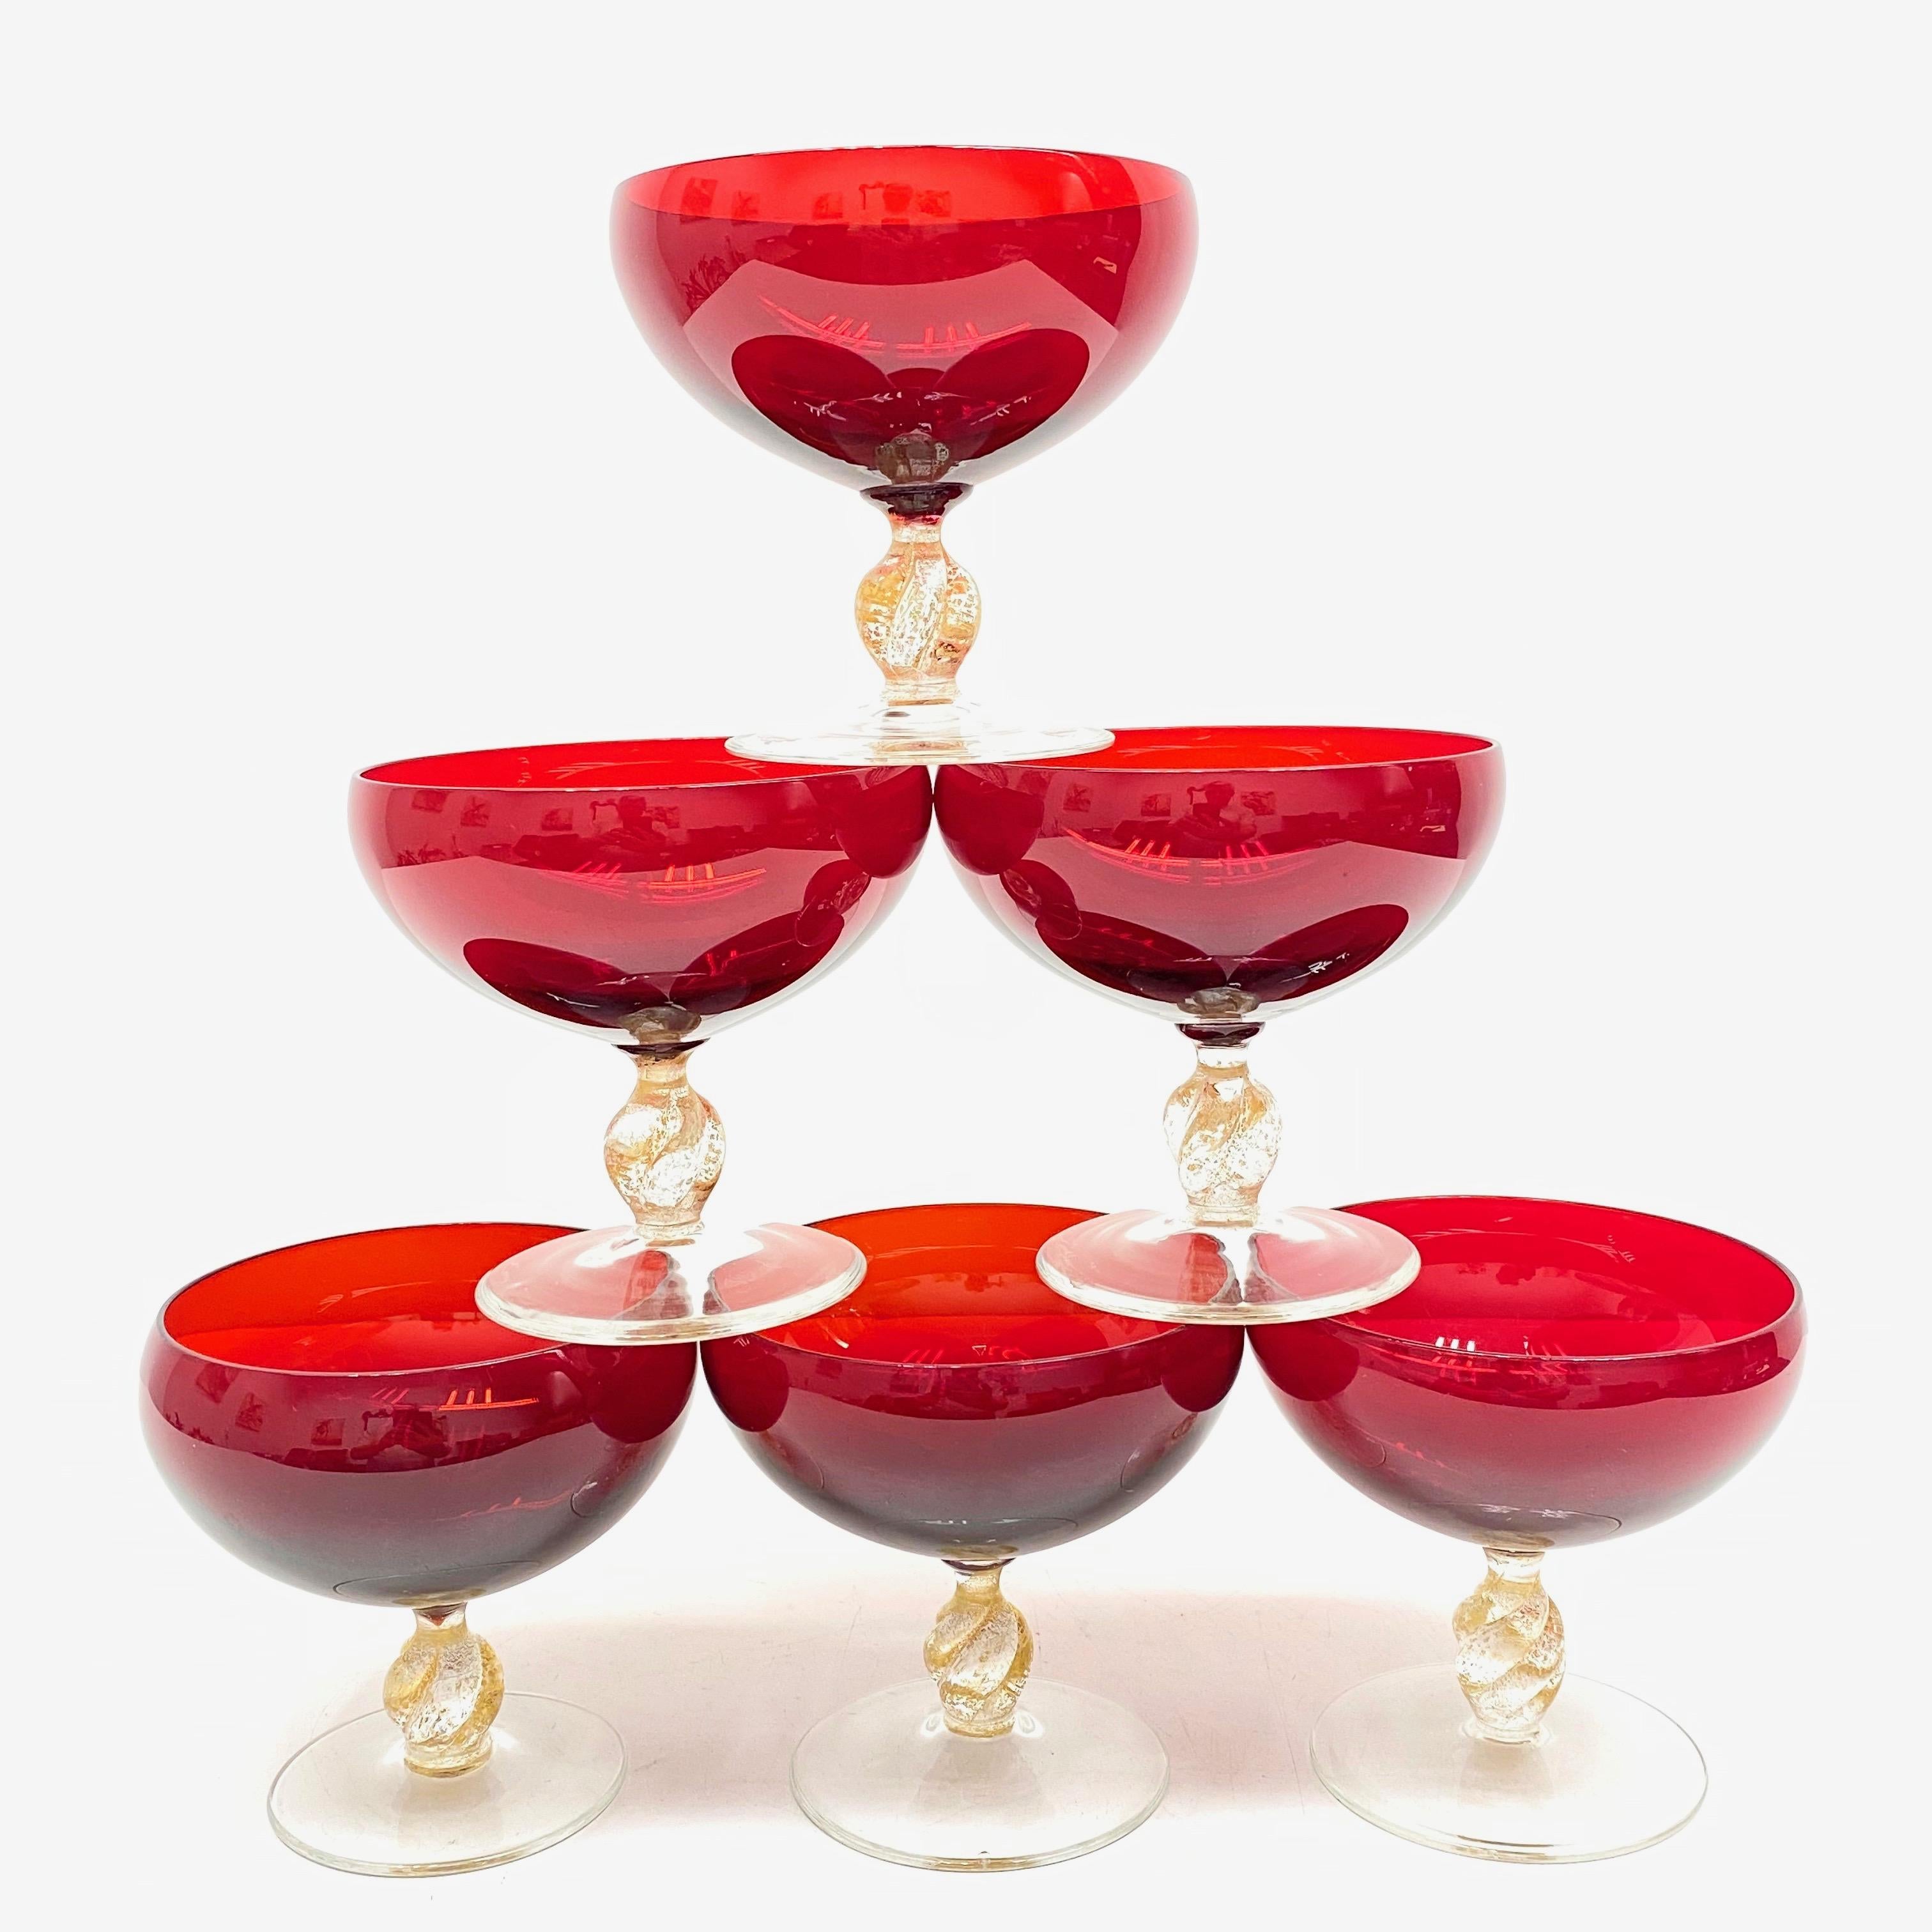 Beautiful Murano hand blown Italian art glass set of six Champagne Goblets or finger food bowls. Attributed to Barovier Toso, a Murano glass company. Made of hand blown red glass with a clear glass and gold flake stem. A nice addition to any table.